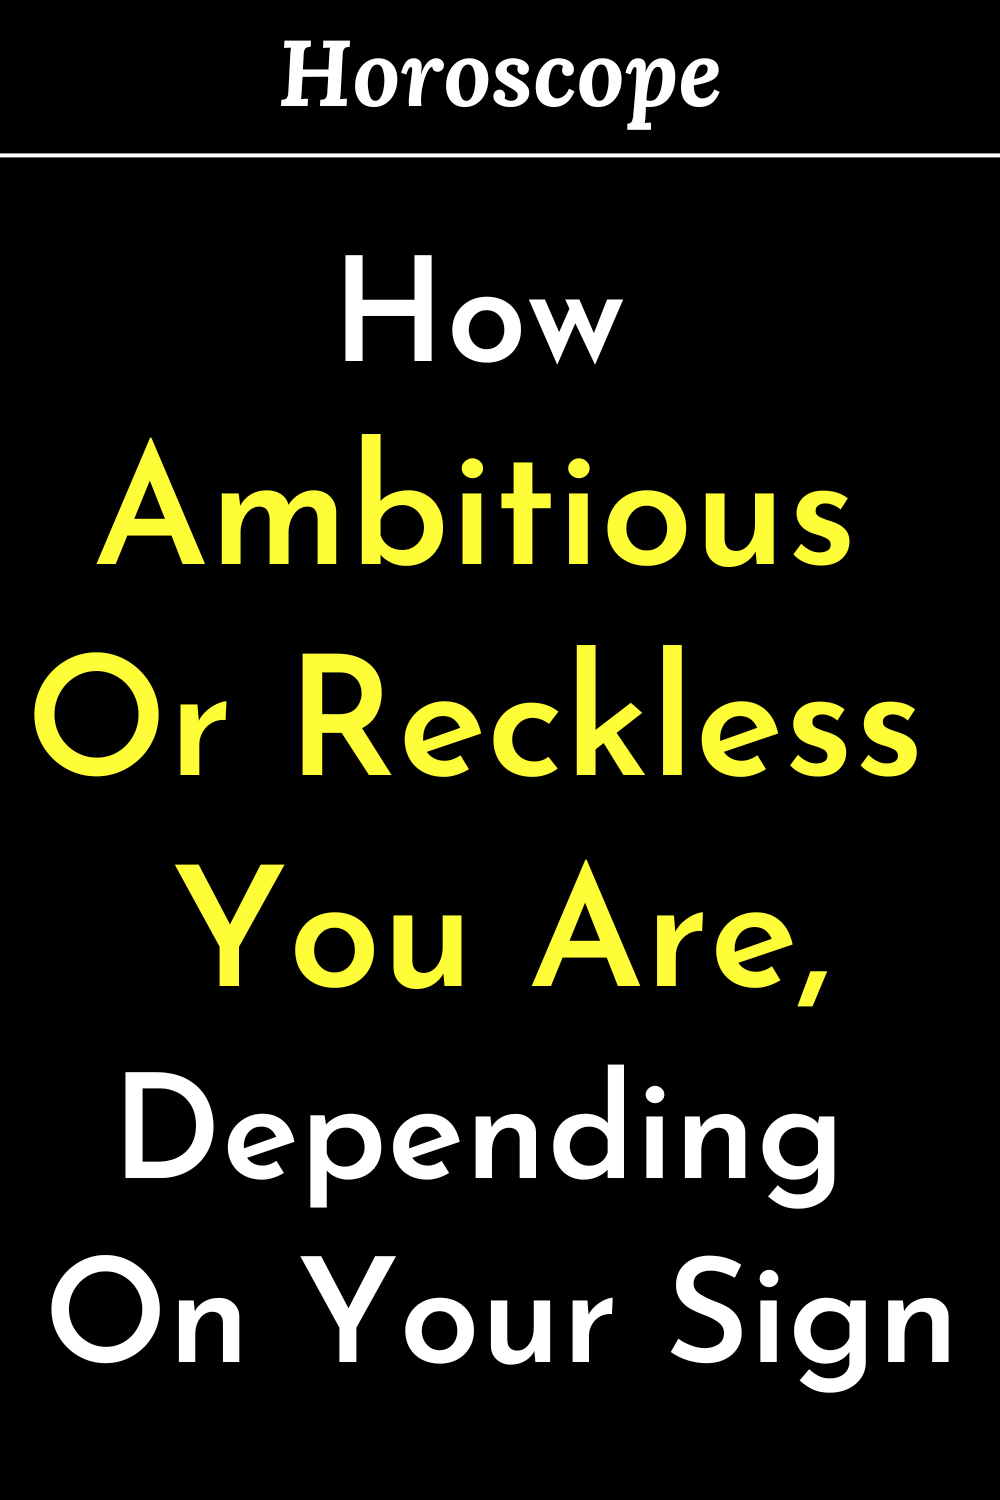 How Ambitious Or Reckless You Are, Depending On Your Sign